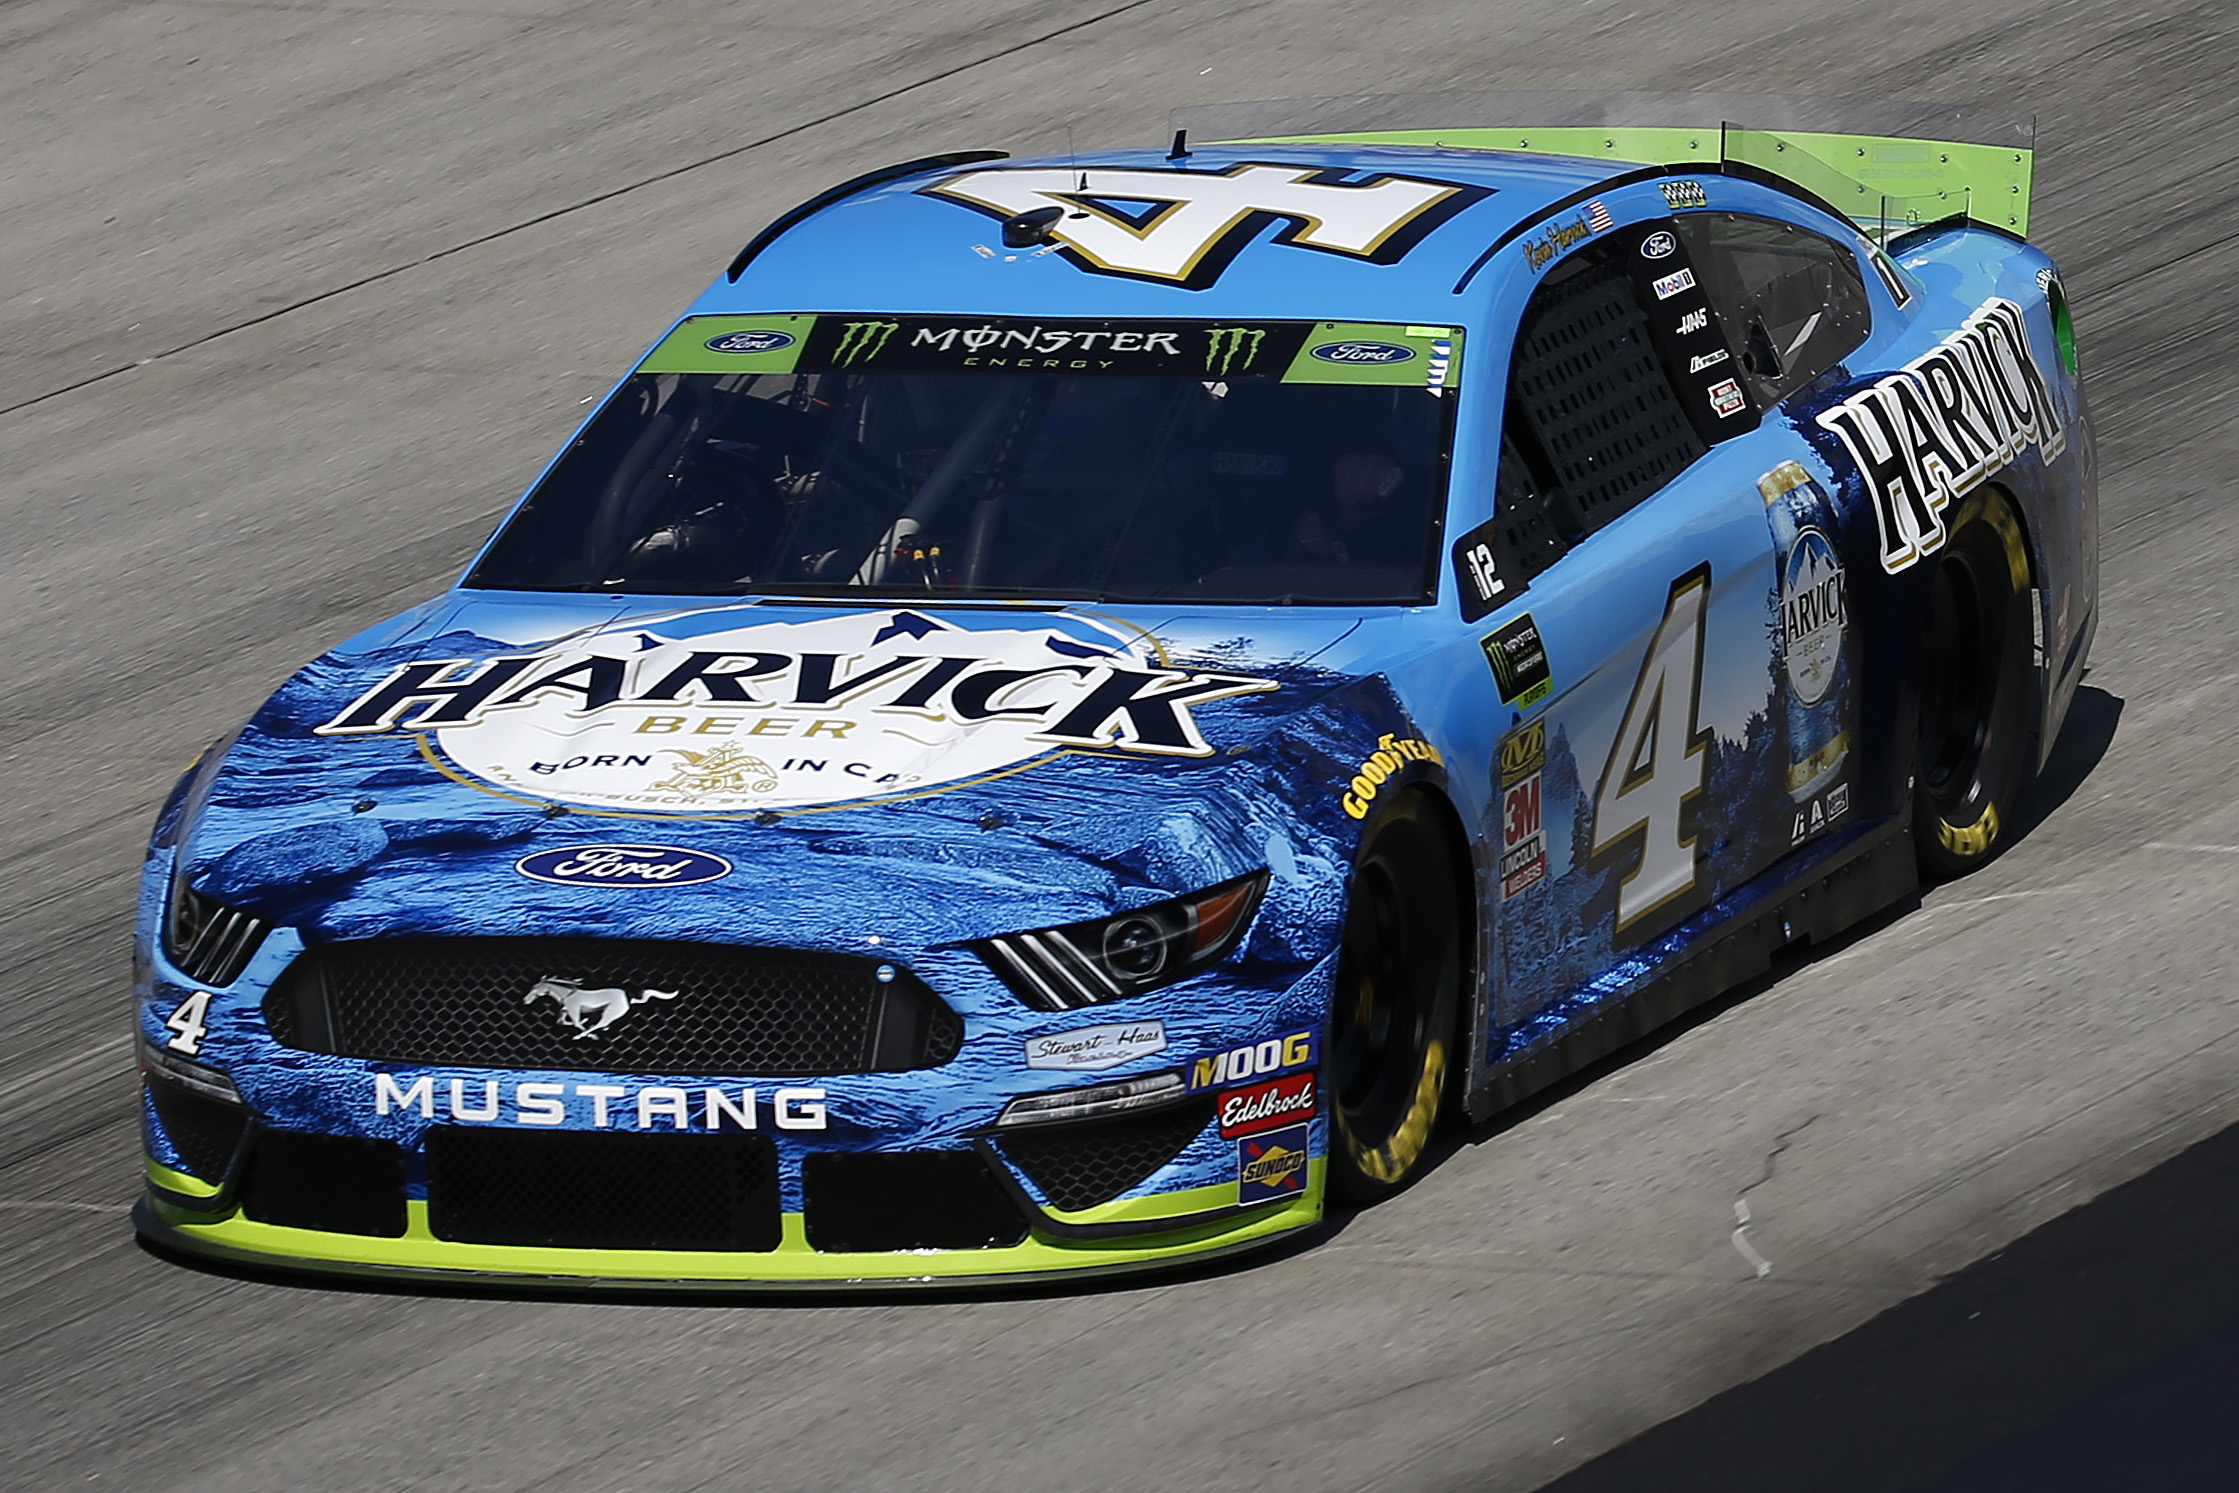 Above all, Kevin Harvick hopes for a win with today's Drydene 400 at Dover. (Photo Credit: Jeff Zelevansky/Getty Images)